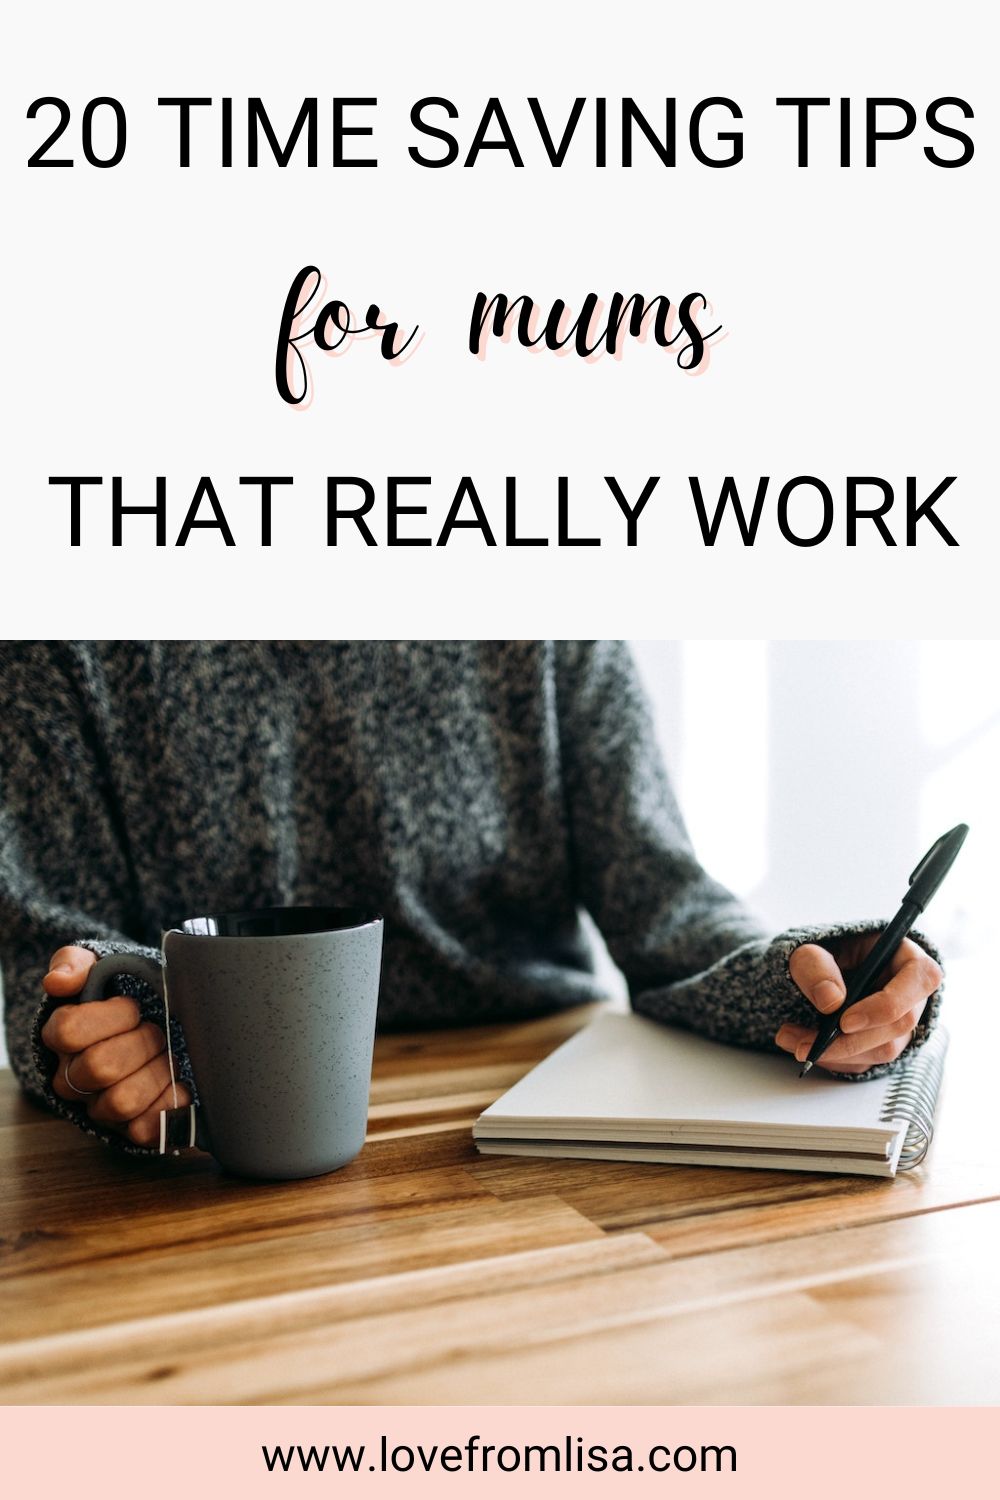 20 time saving tips for mums that really work Pinterest graphic